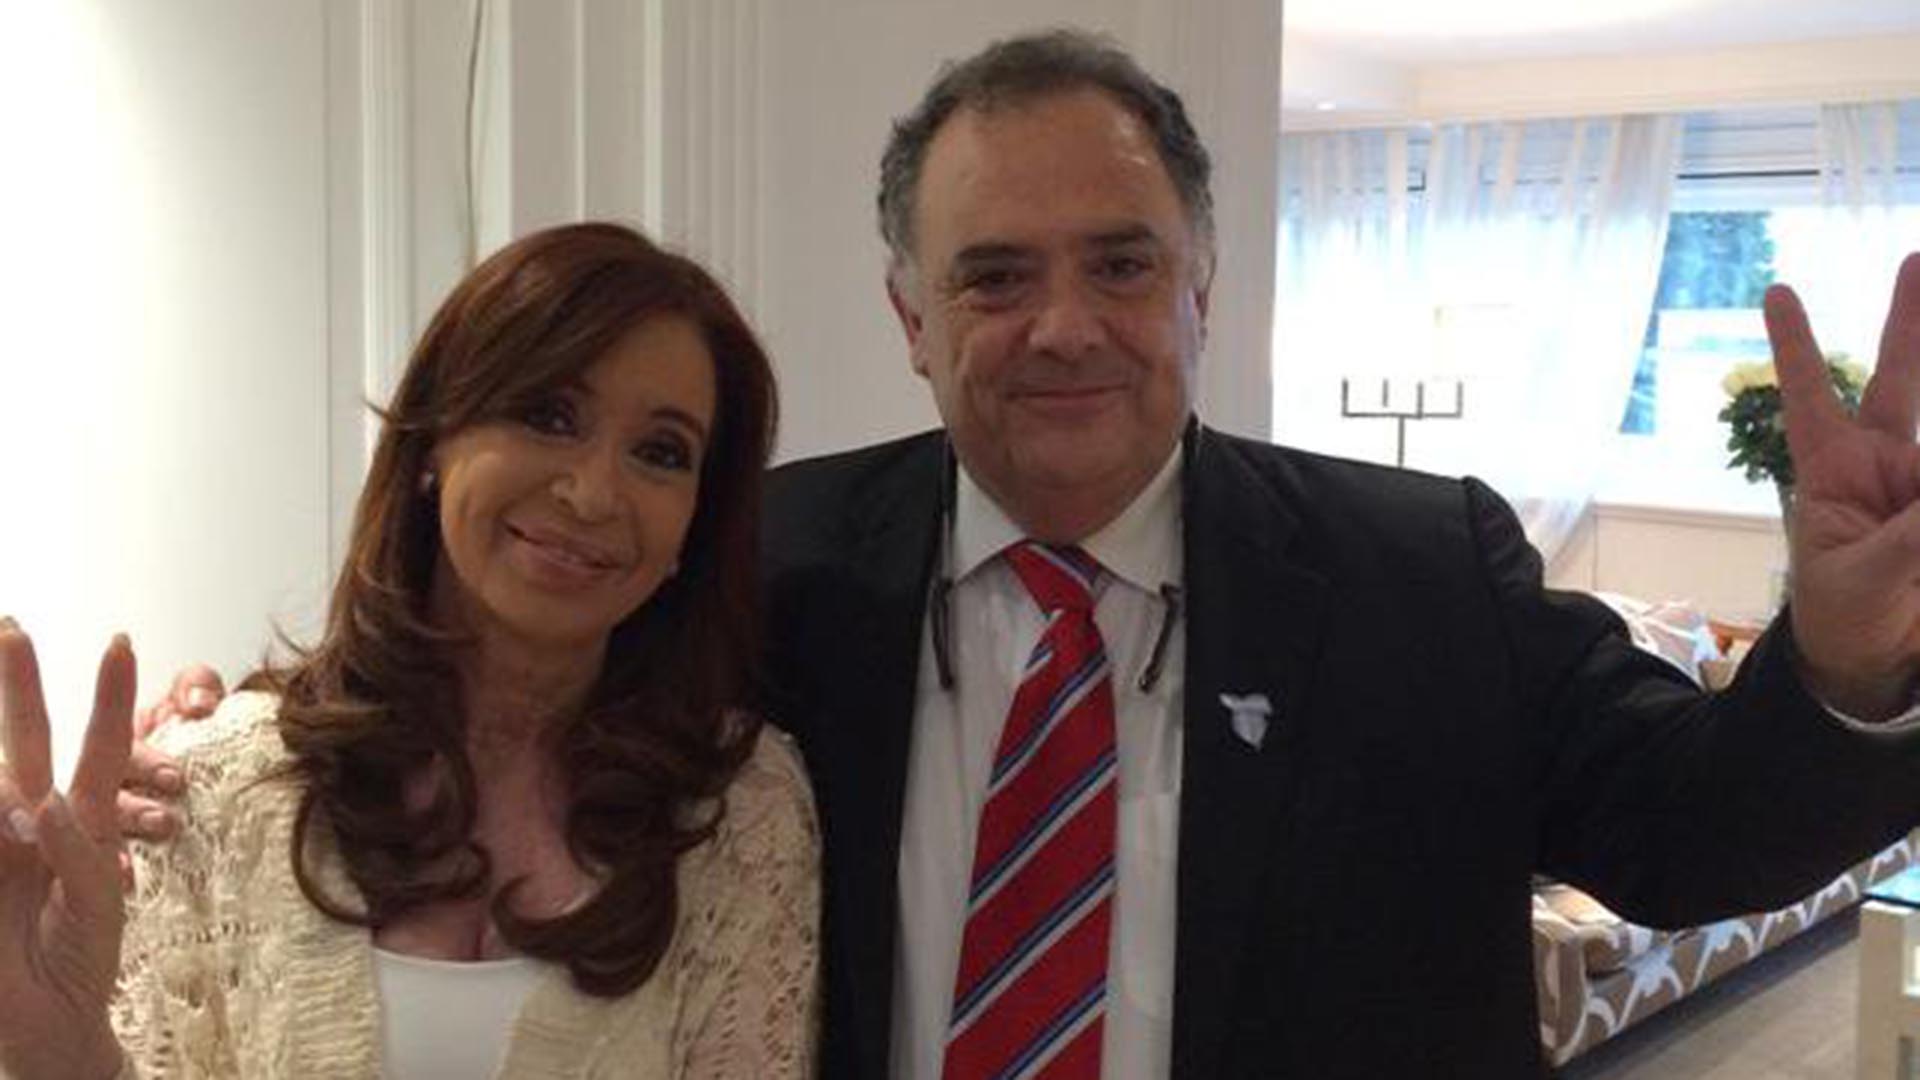 Eduardo Valdés met with Cristina Kirchner and participated in the reception of some of the presidents who participated in the CELAC summit.  (Twitter: @eduardofvaldes)